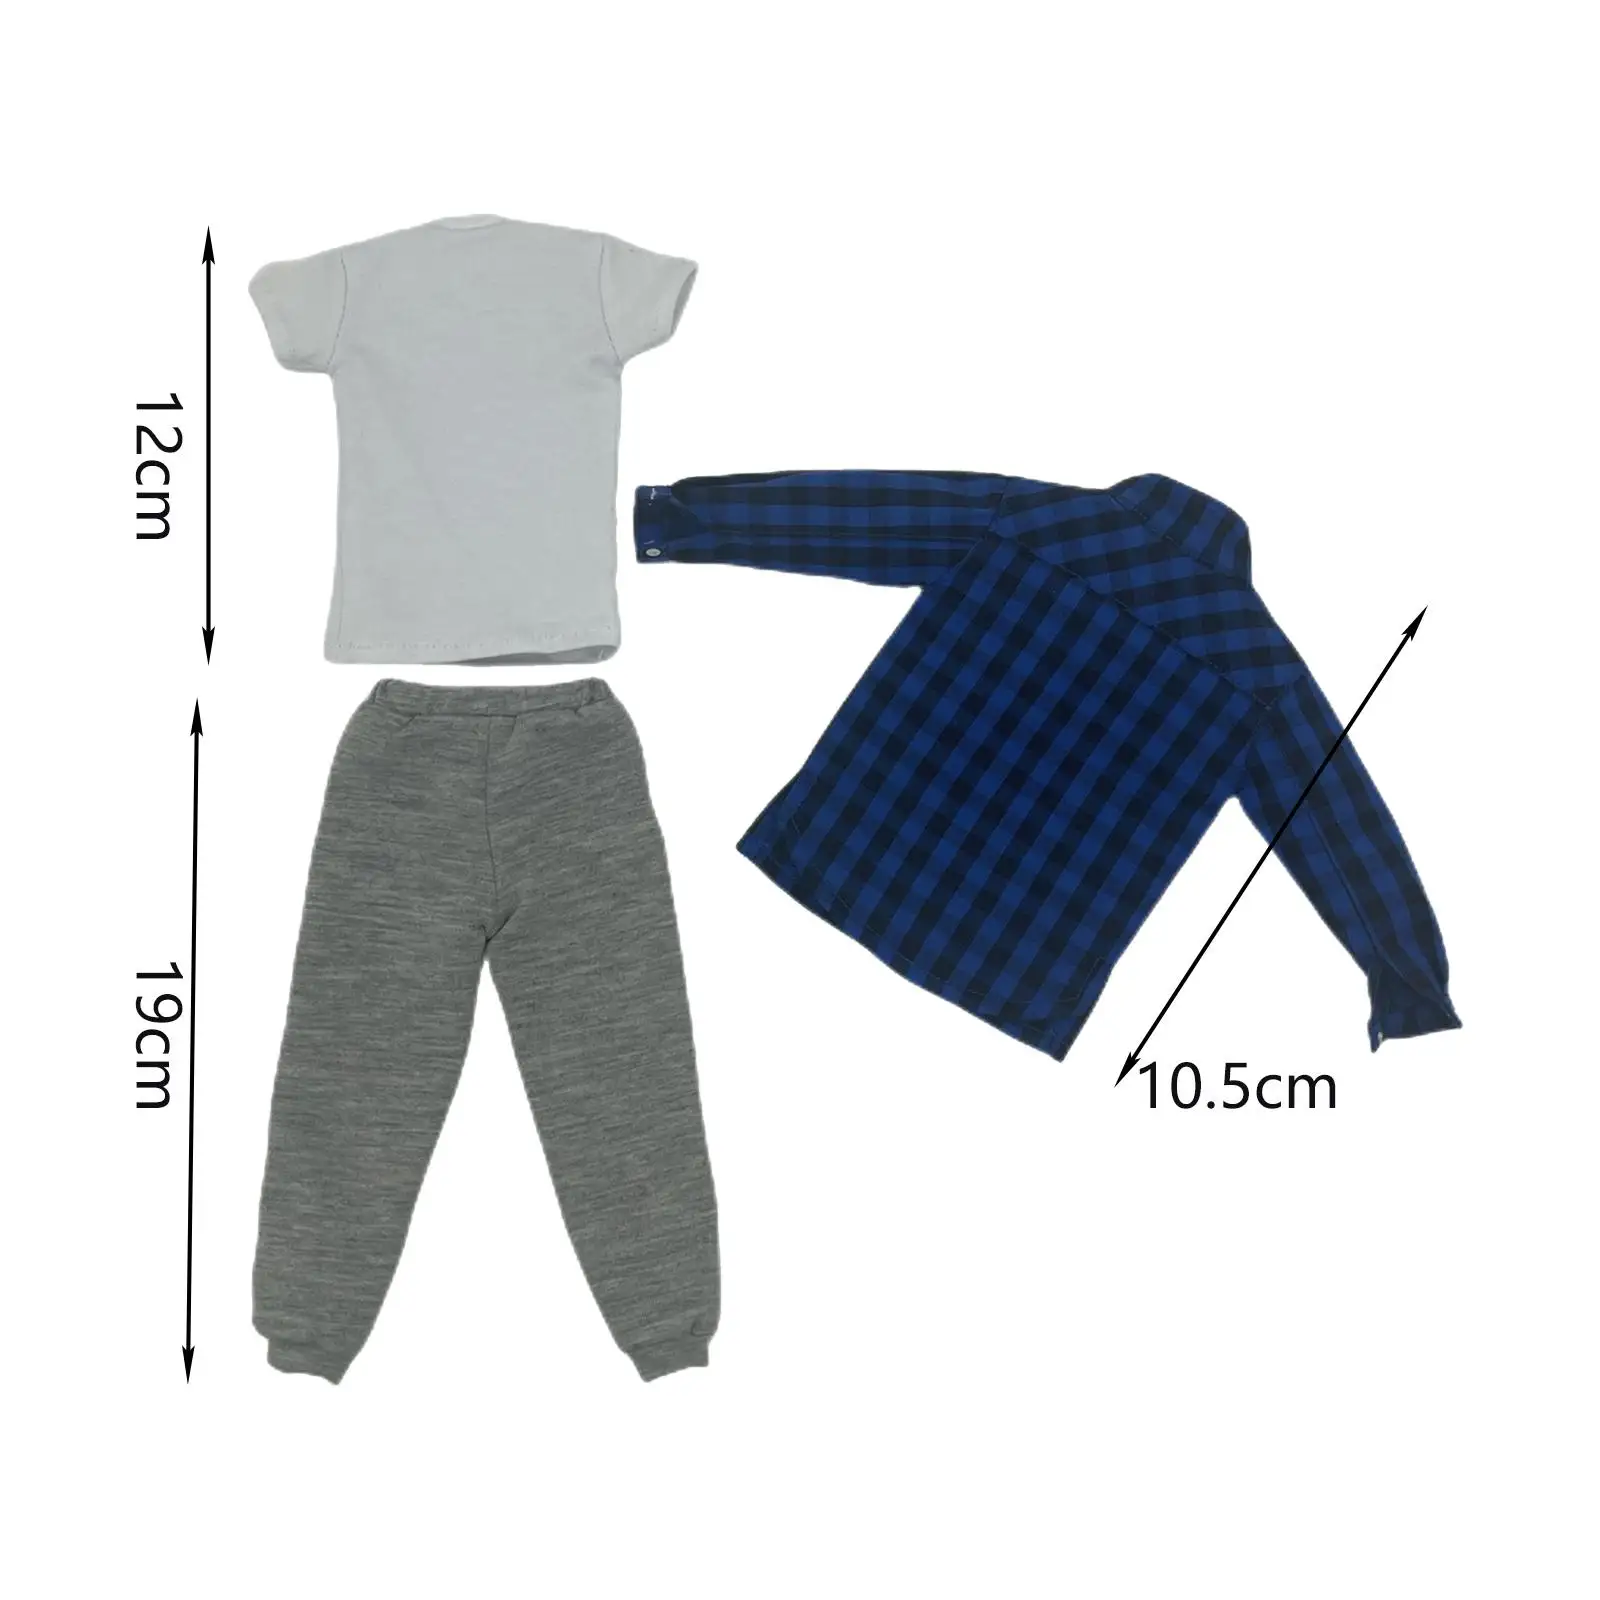 1/6 Scale Shirt and Pants Set Birthday Gifts 12 inch Male Action Figure Doll Clothes Toy Accessories Leisure for 1/6 Doll